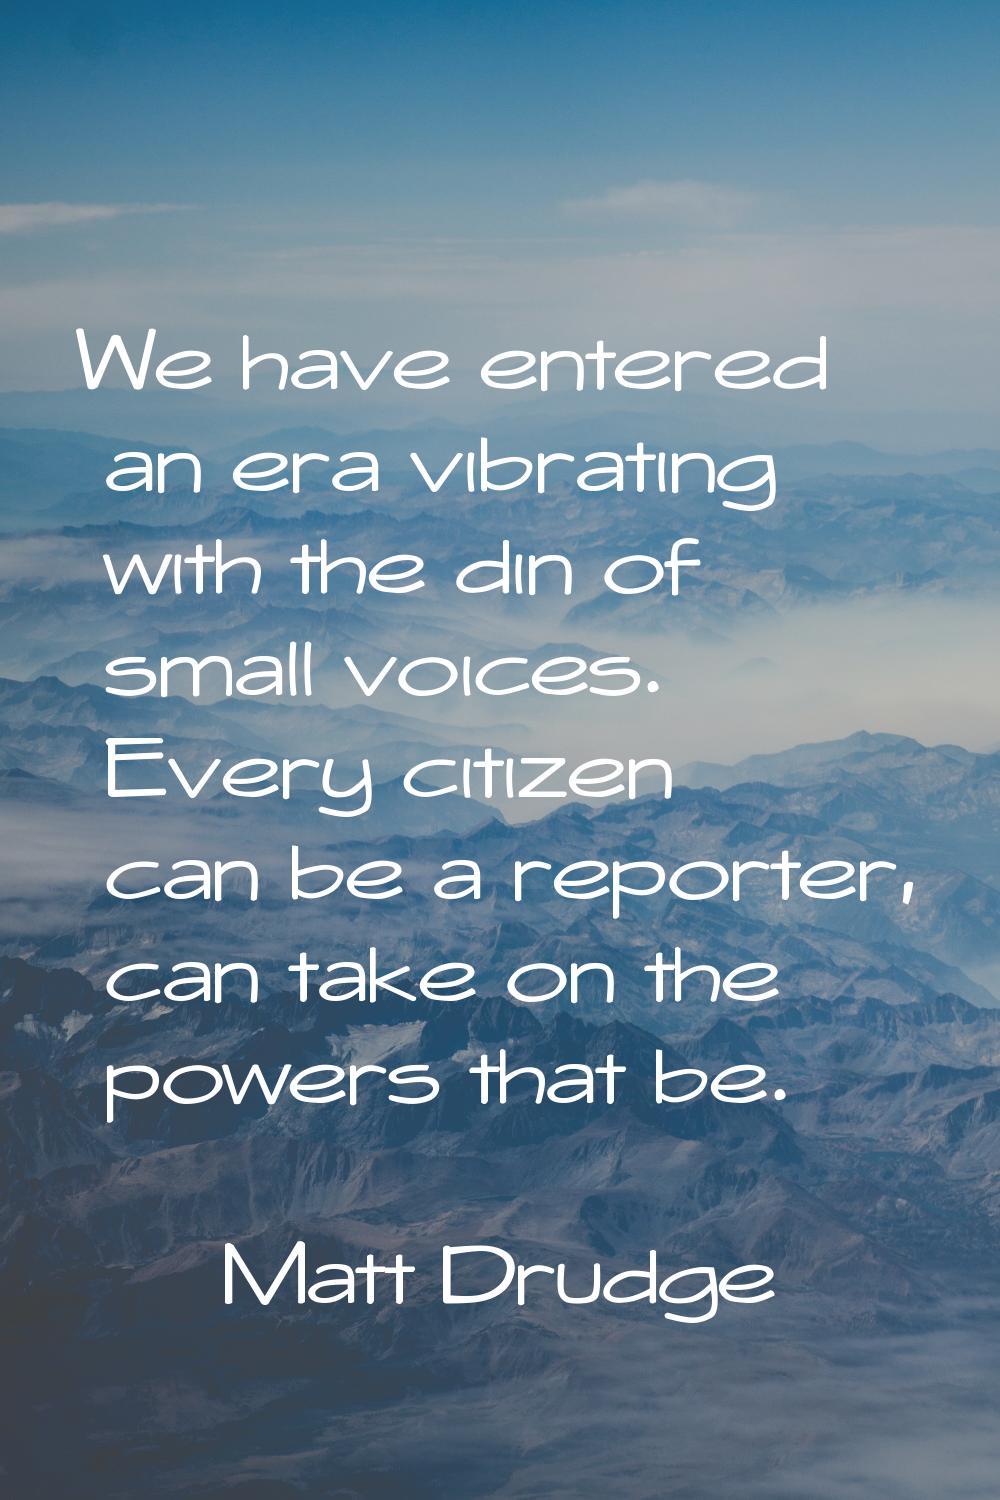 We have entered an era vibrating with the din of small voices. Every citizen can be a reporter, can